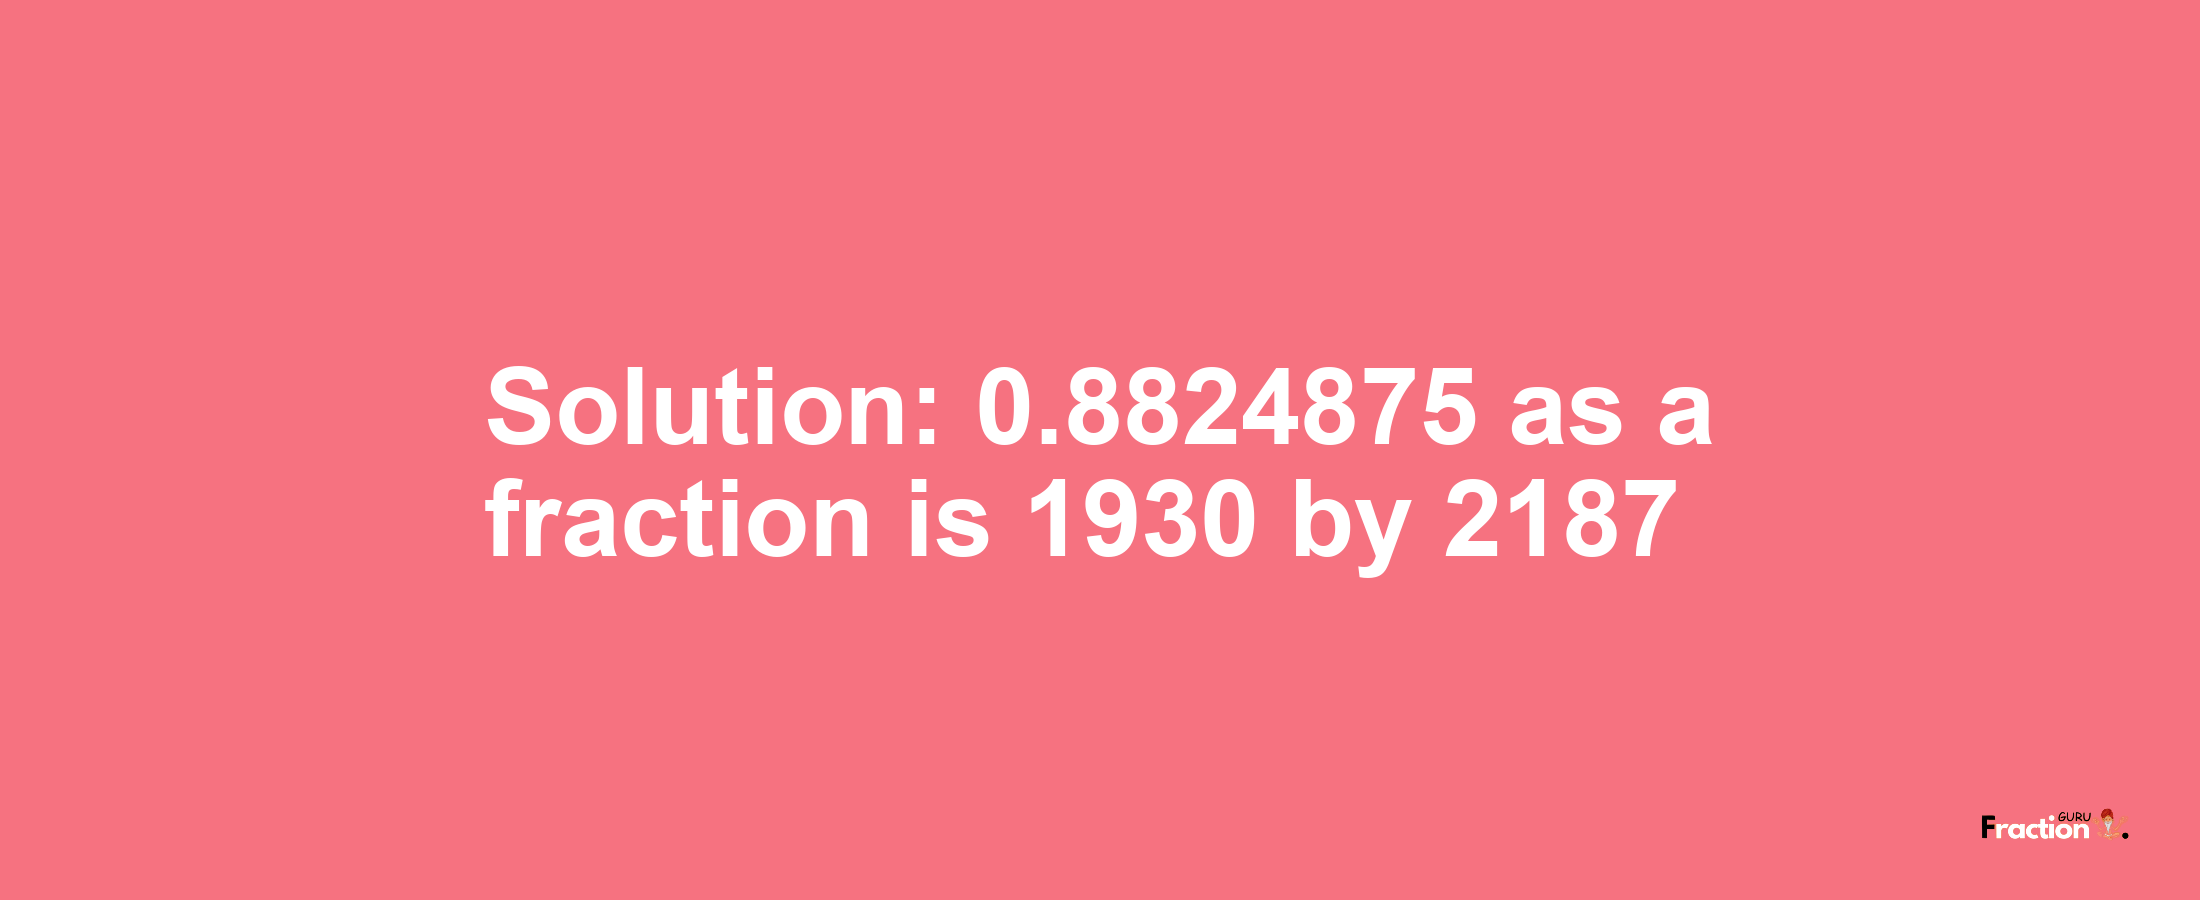 Solution:0.8824875 as a fraction is 1930/2187